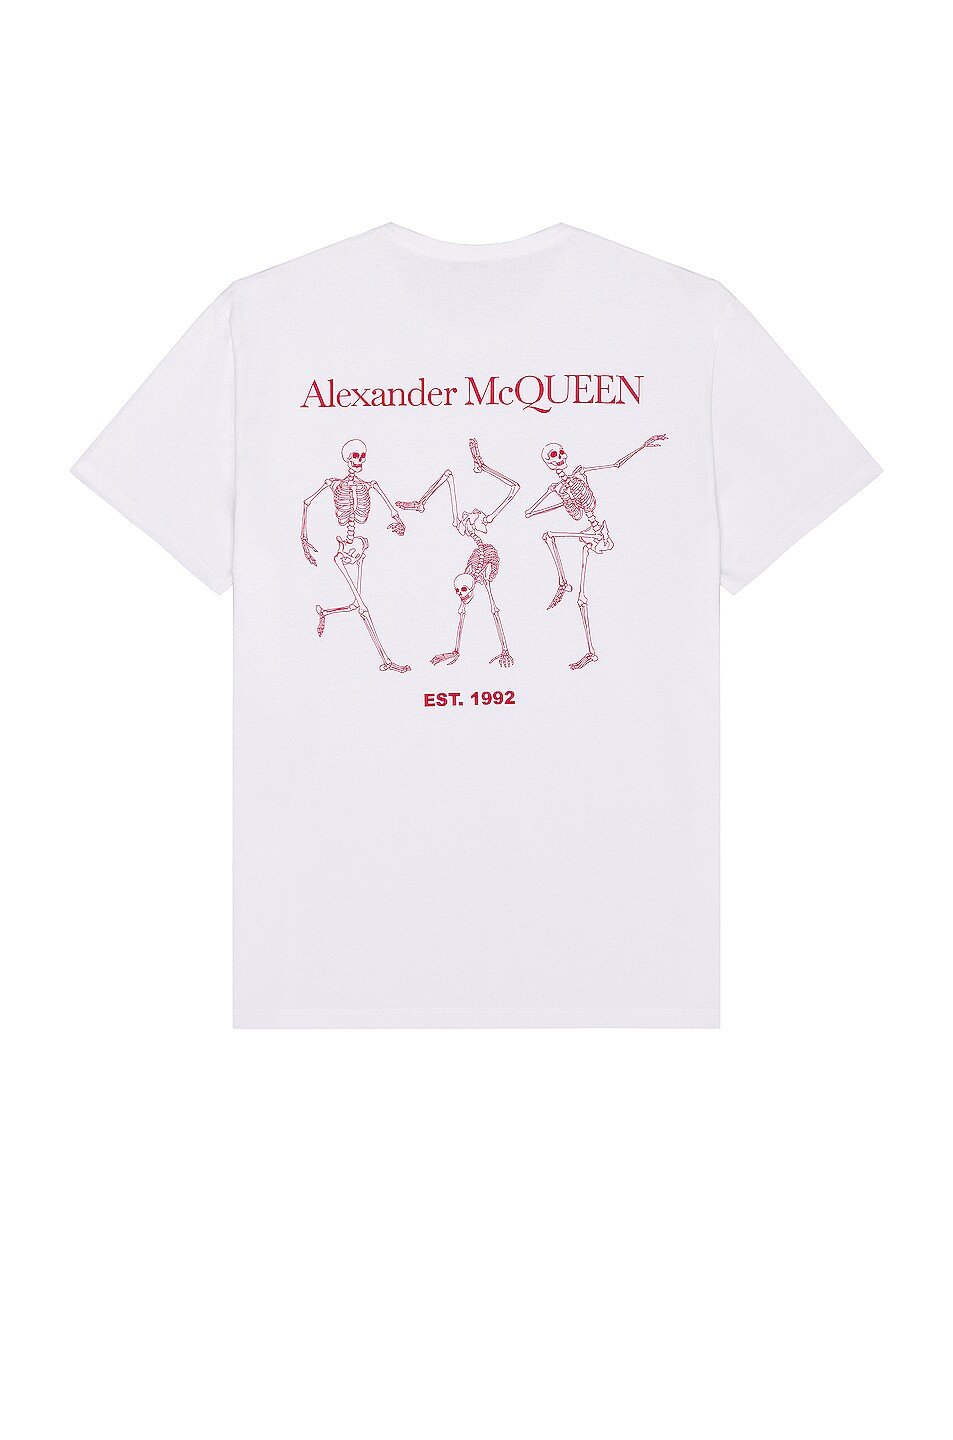 Image 1 of Alexander McQueen T-Shirt in White & Welsh Red